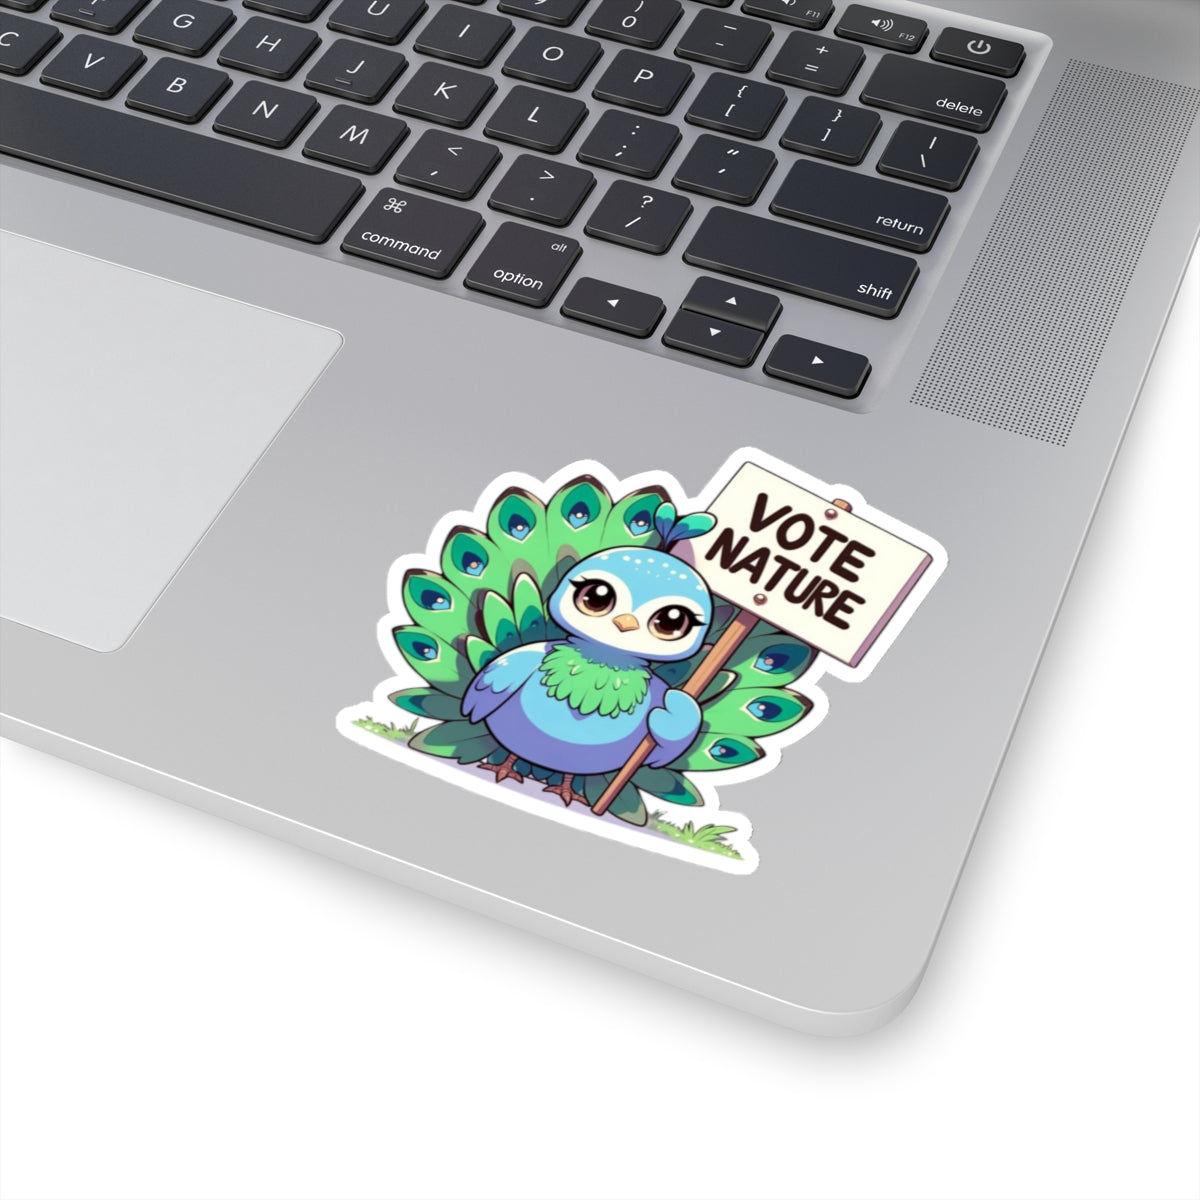 Inspirational Cute Peakcock Statement vinyl Sticker: Vote Nature! for laptop, kindle, phone, ipad, instrument case, notebook, mood board